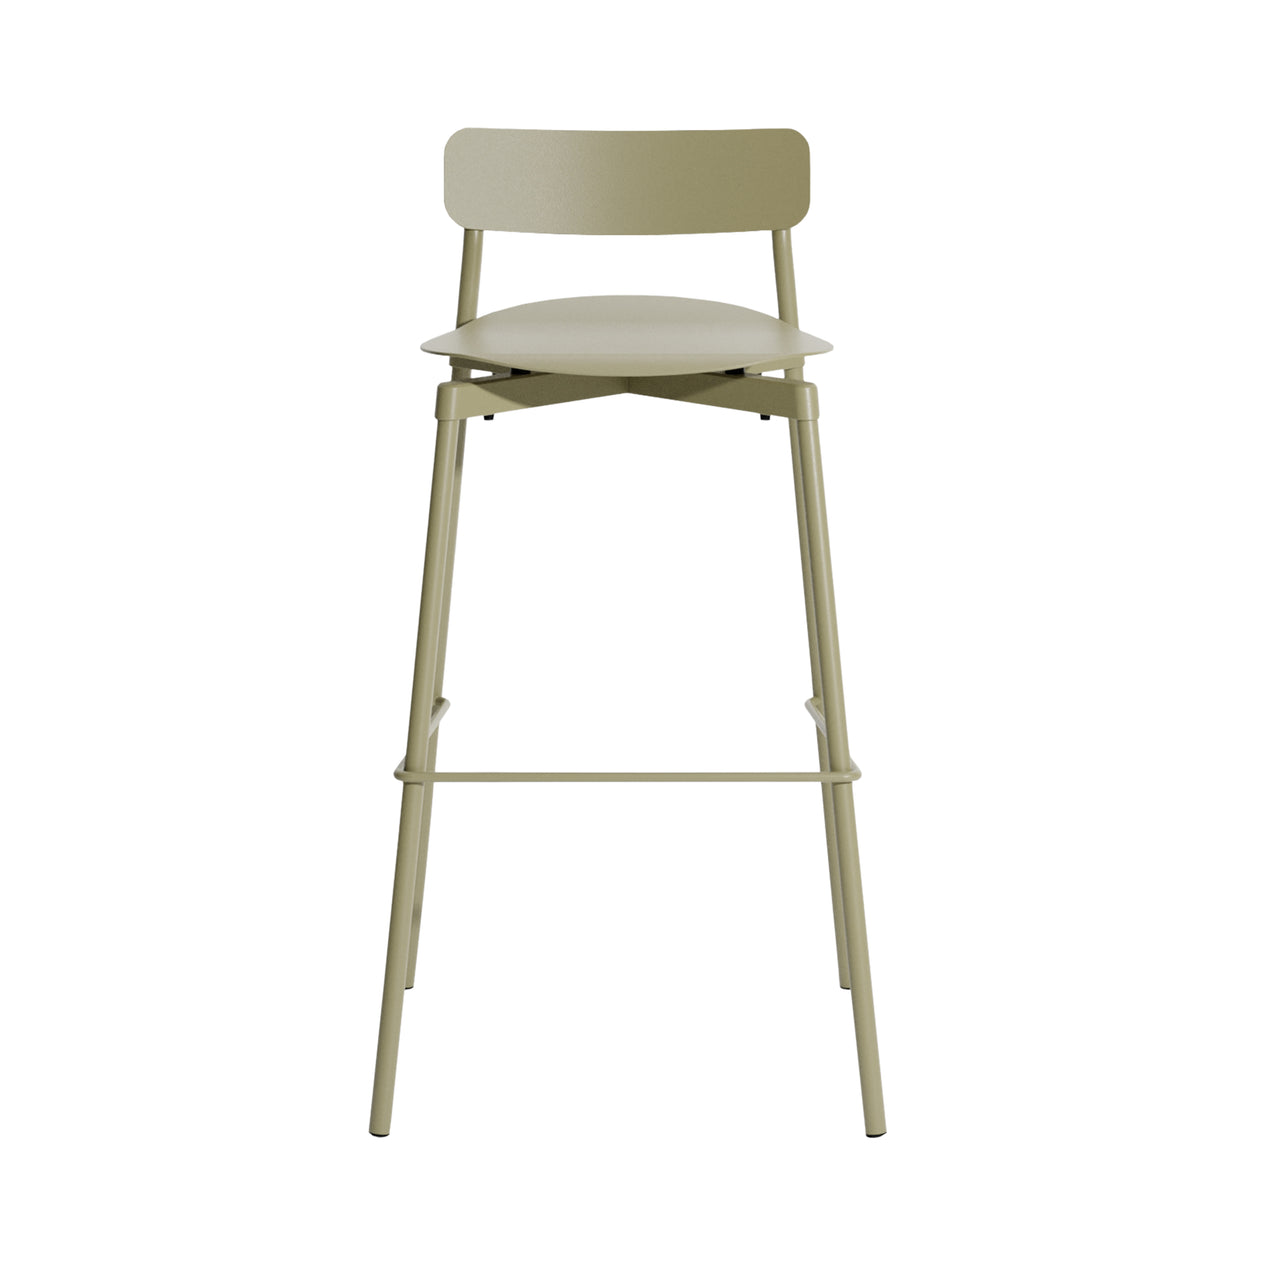  Fromme Stacking Bar + Counter Stool: Bar + Jade Green